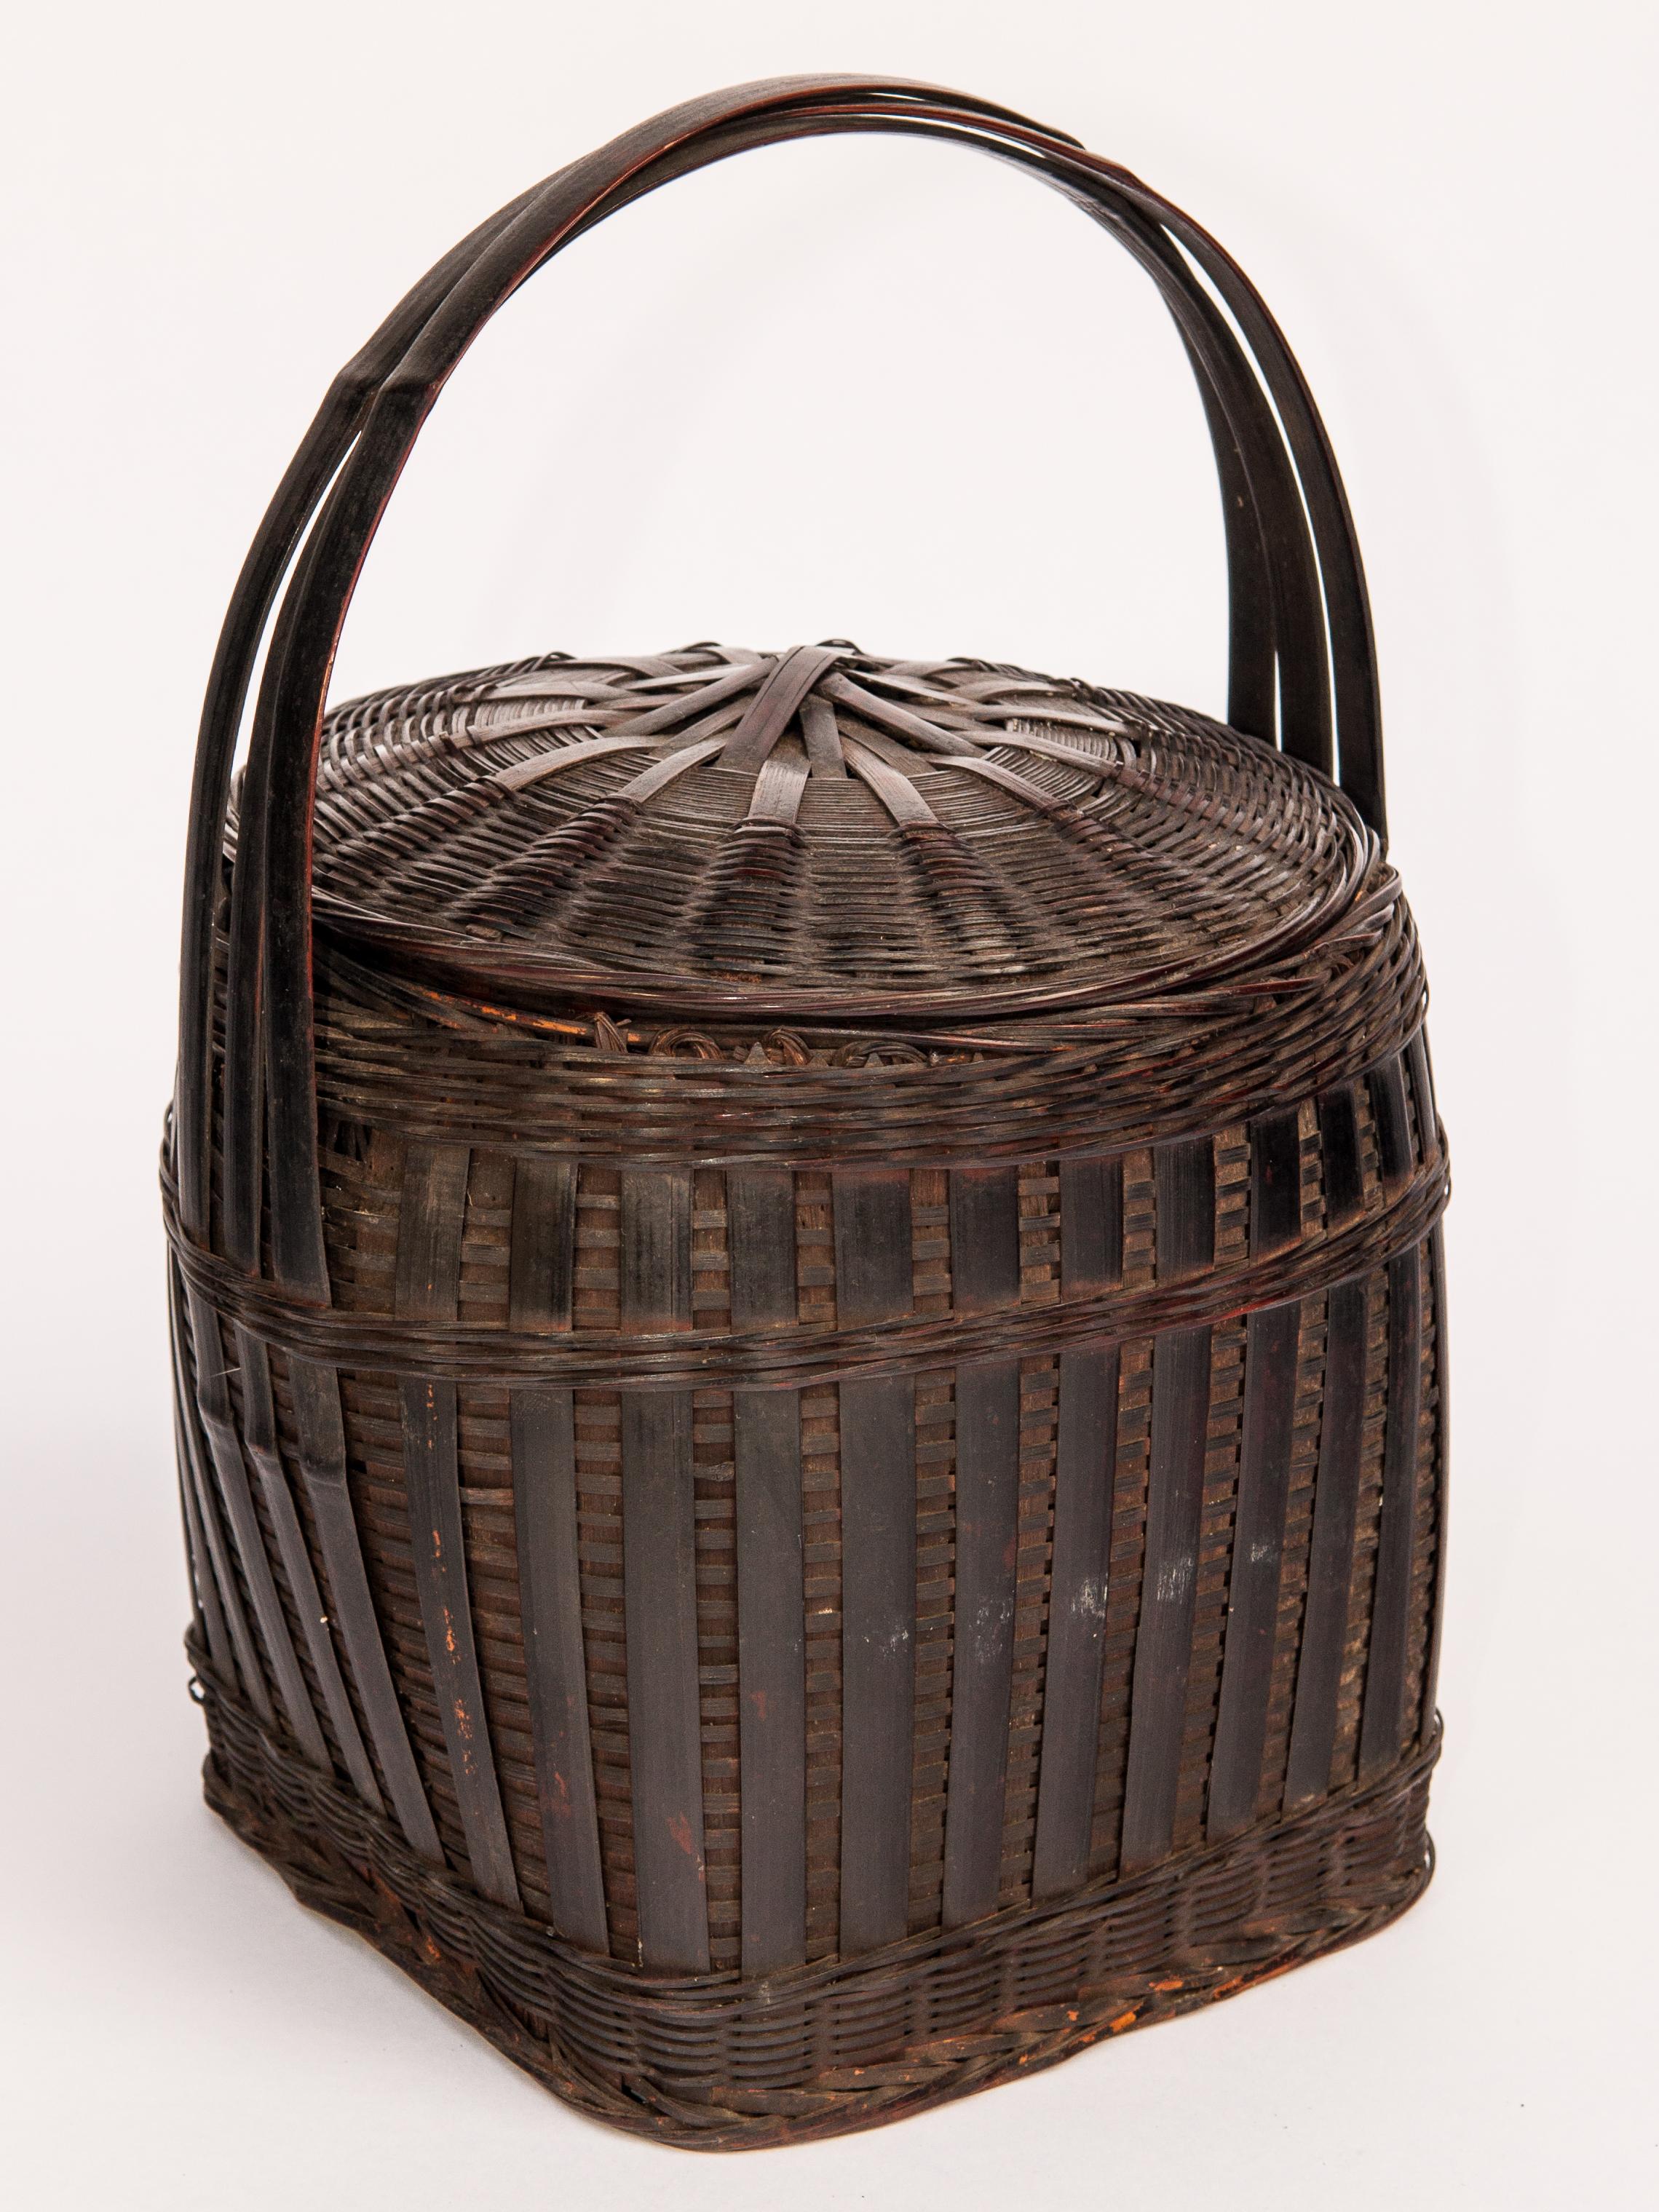 Hand-Crafted Hmong Storage Basket with Lid and Handle, Guizhou, China, Mid-20th Century